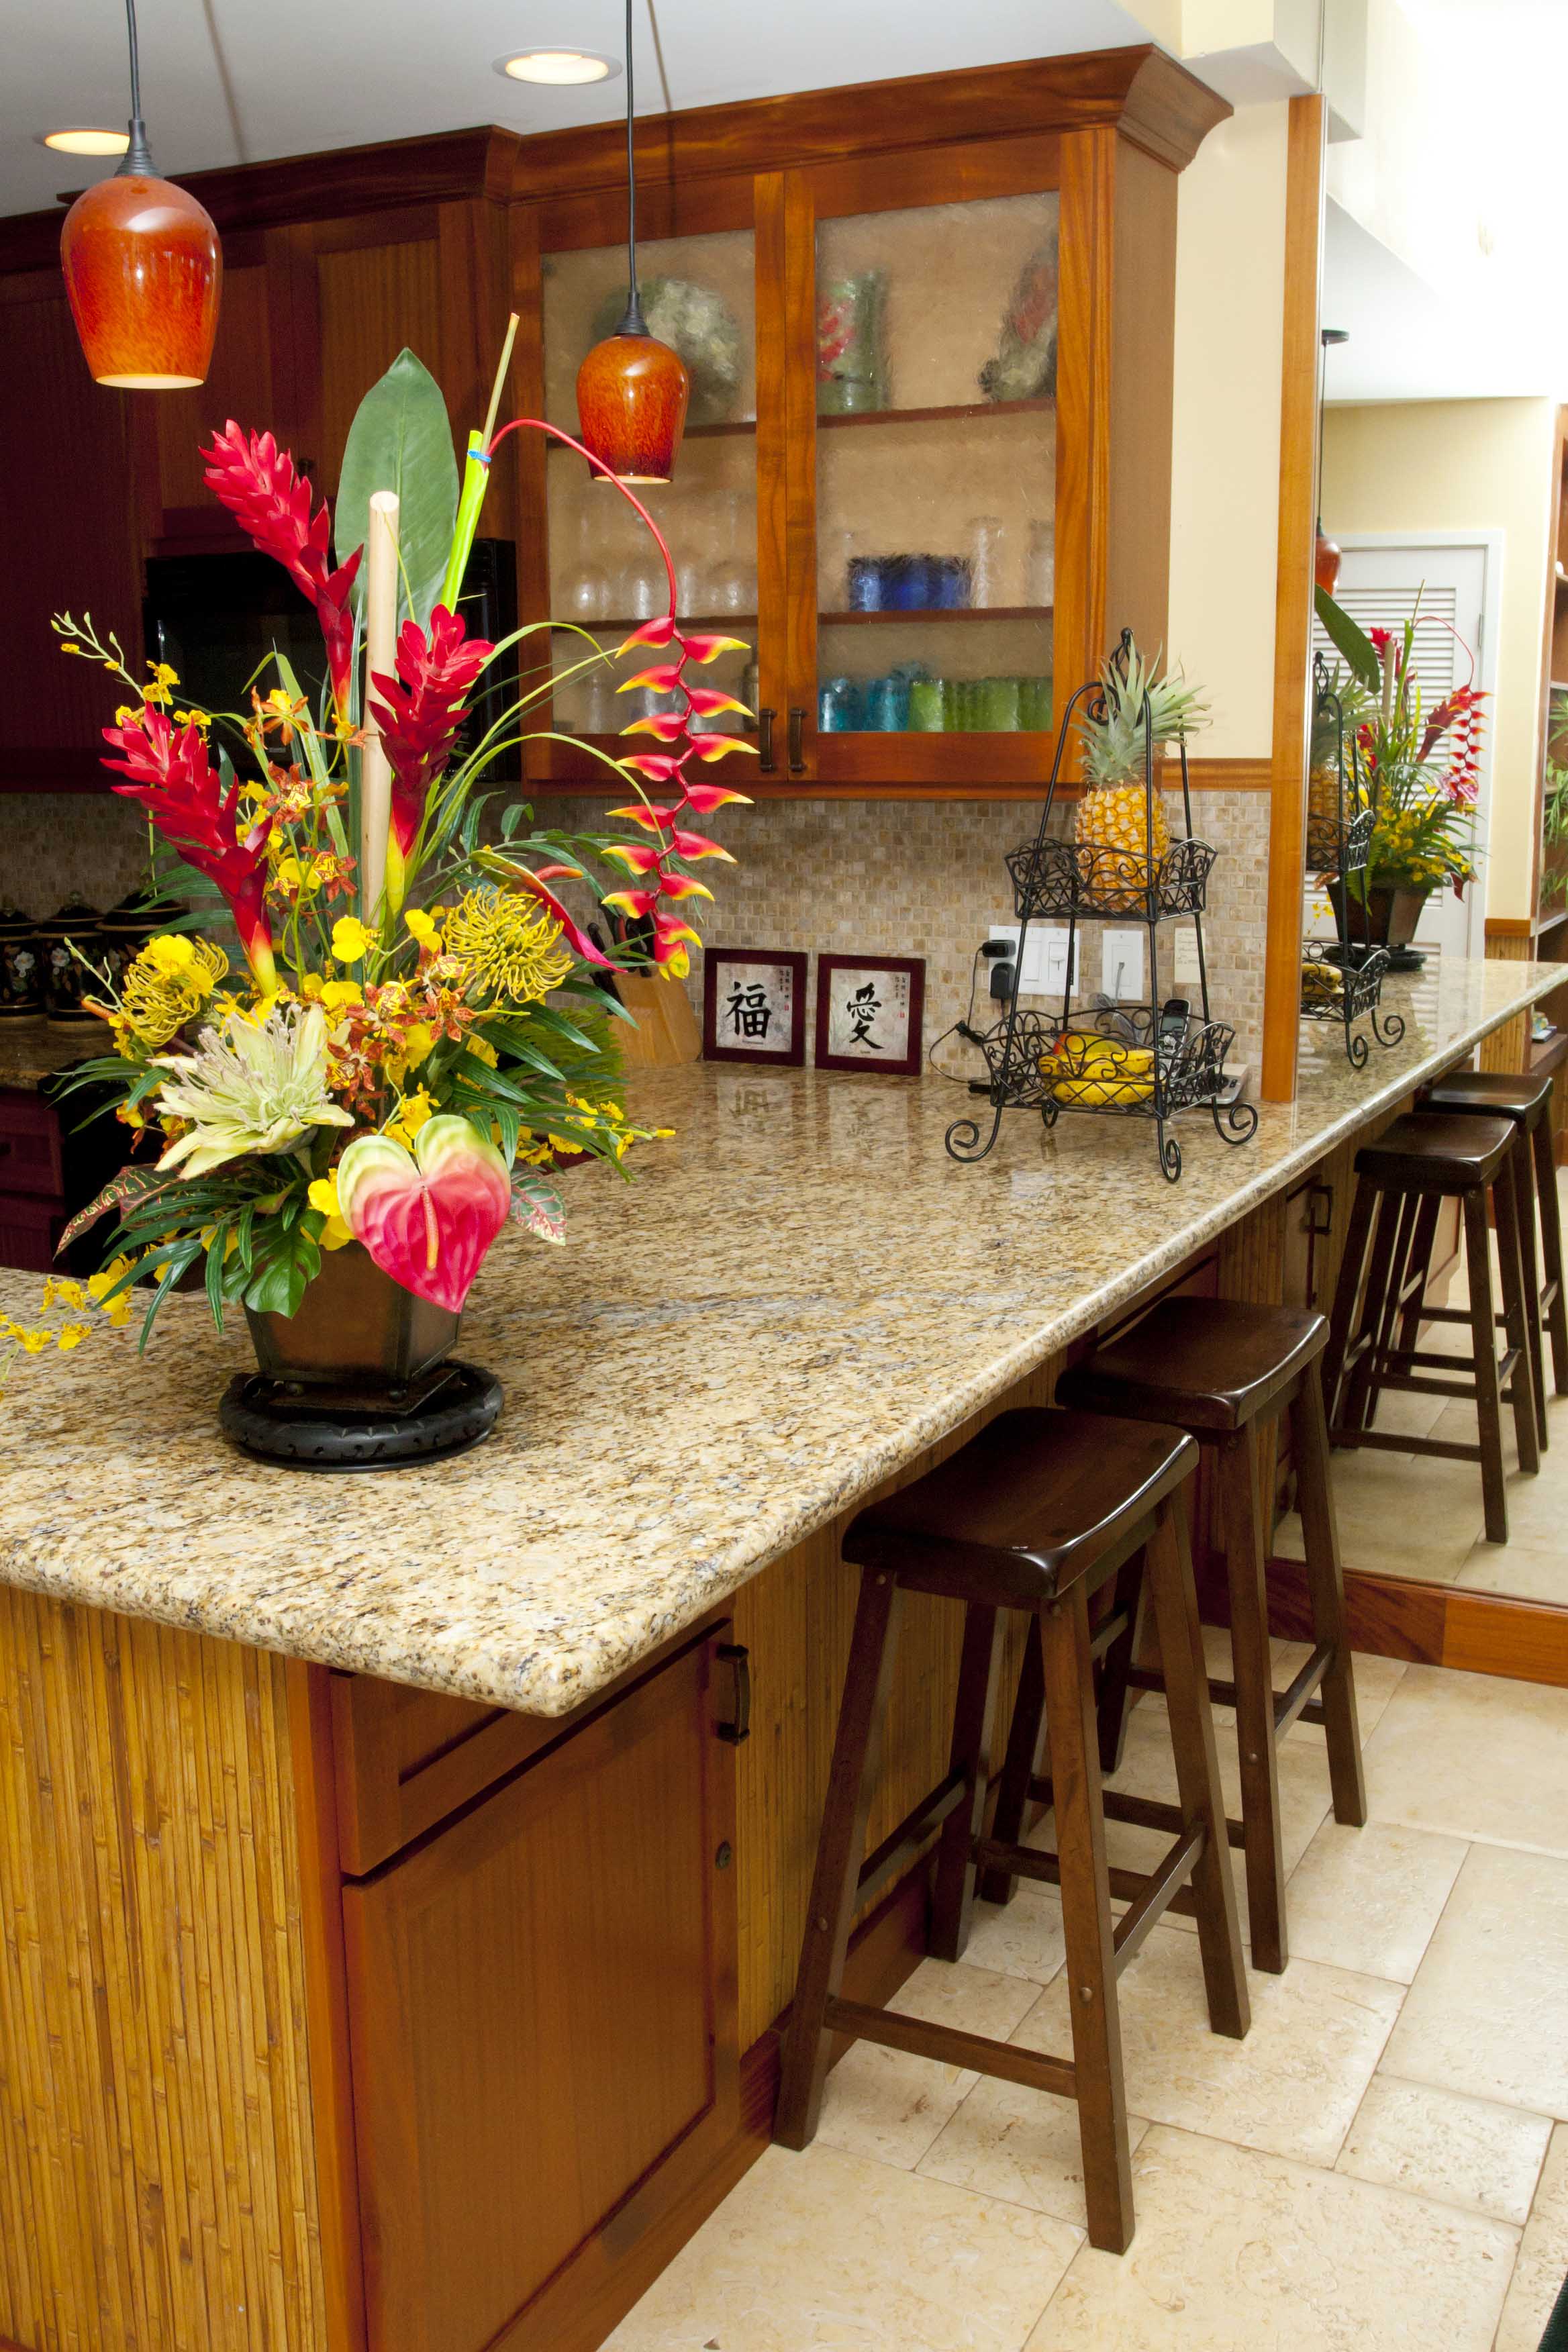 Granite counters, tile floors, beautifully decorated and appointed.